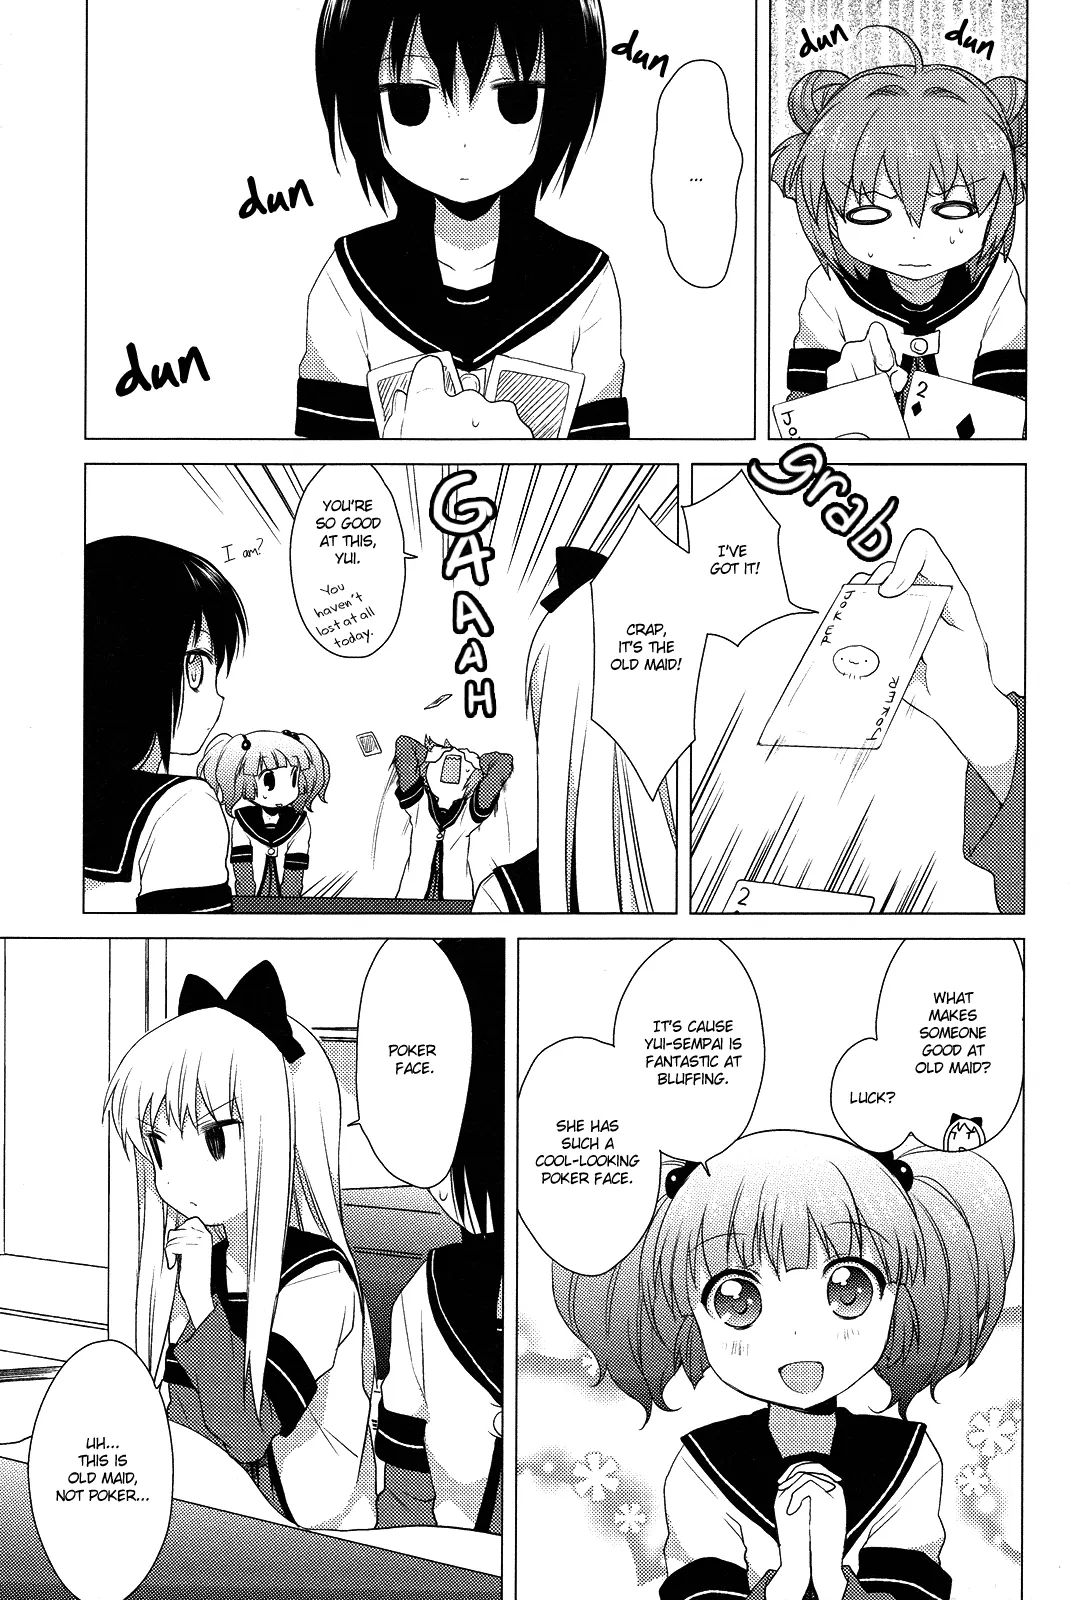 Yuru Yuri Vol.3 Chapter 25: Let's Give Each Other Nicknames - Picture 3